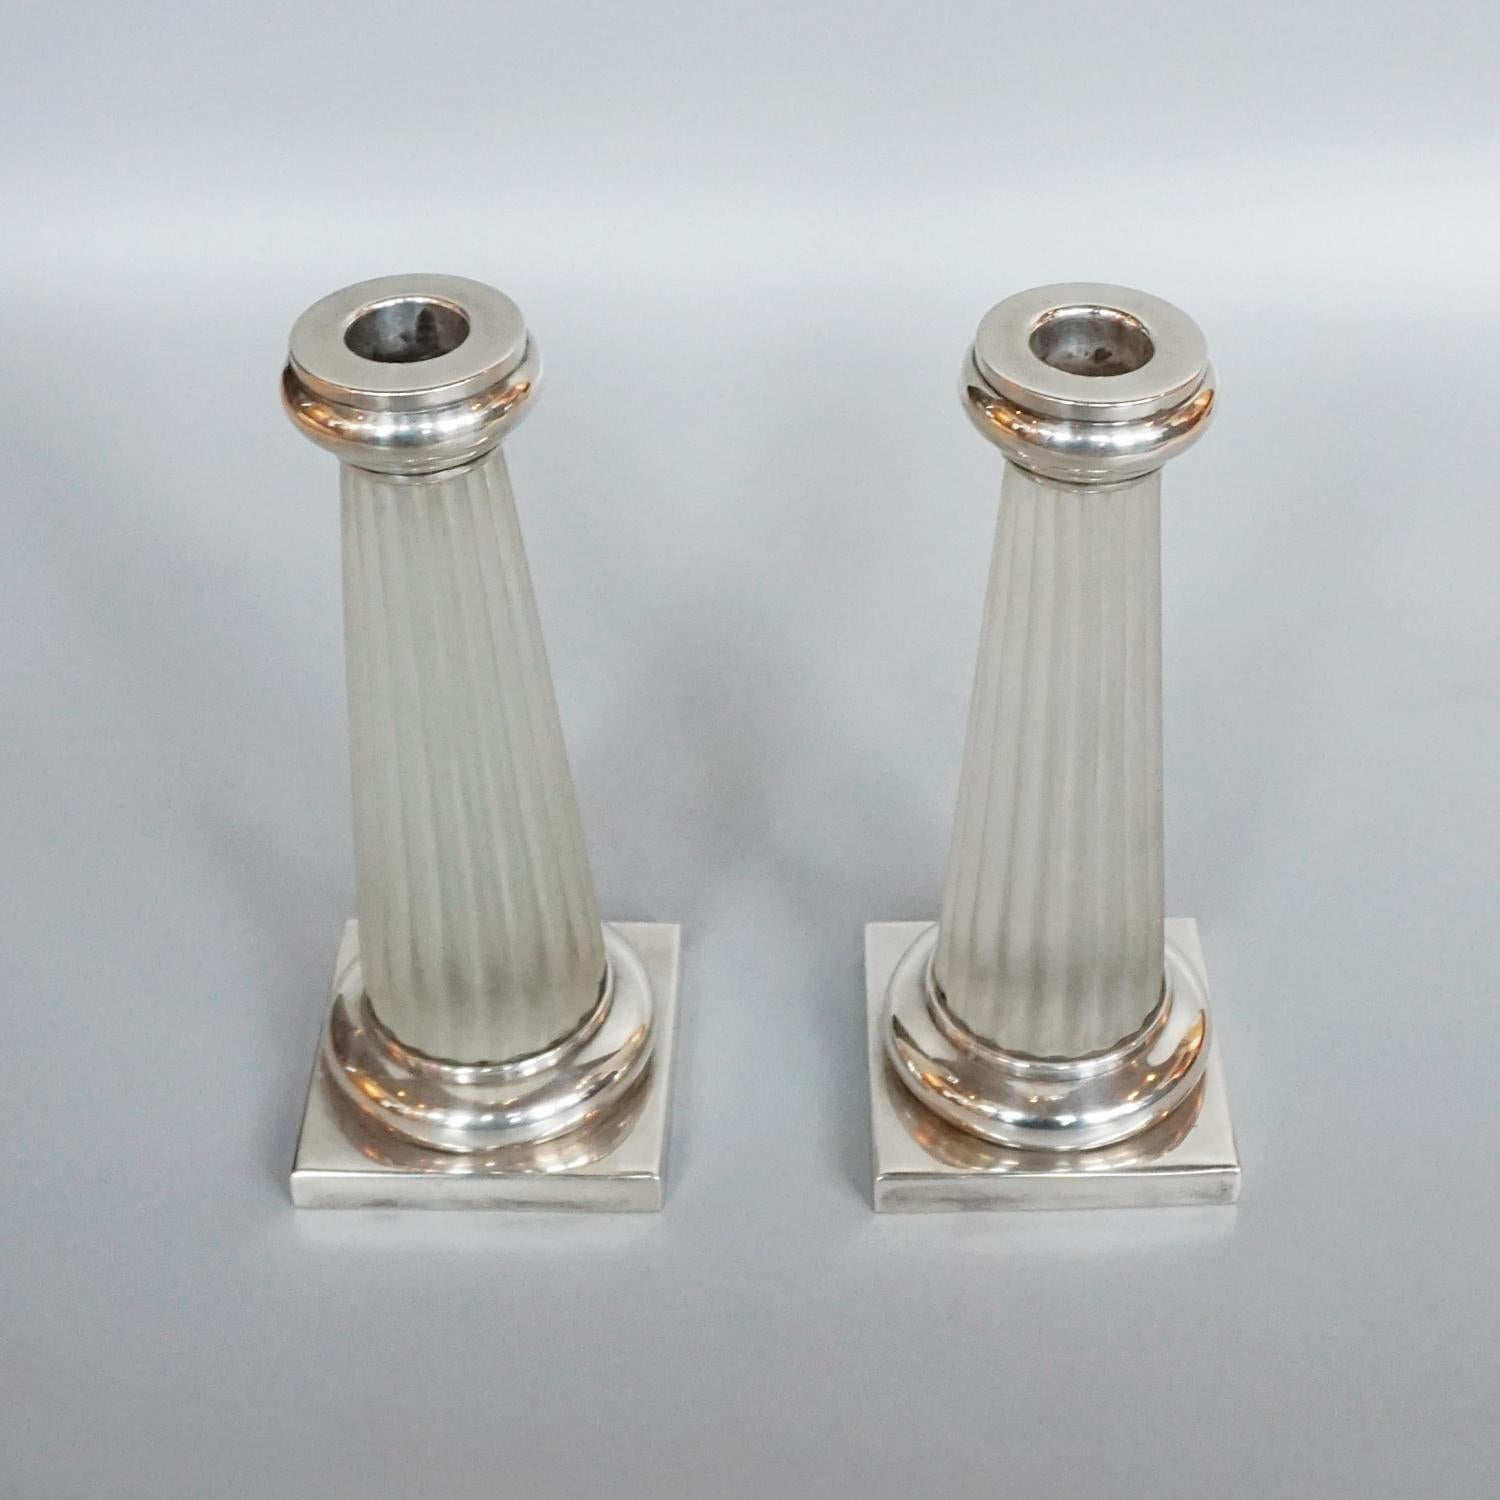 A pair of Art Deco candlesticks. Continental silver and glass. Stamped underneath.

Dimensions: H 21cm W 8cm D 8cm.

Origin: French.

Date: 1934.

Item Number: 1201221.